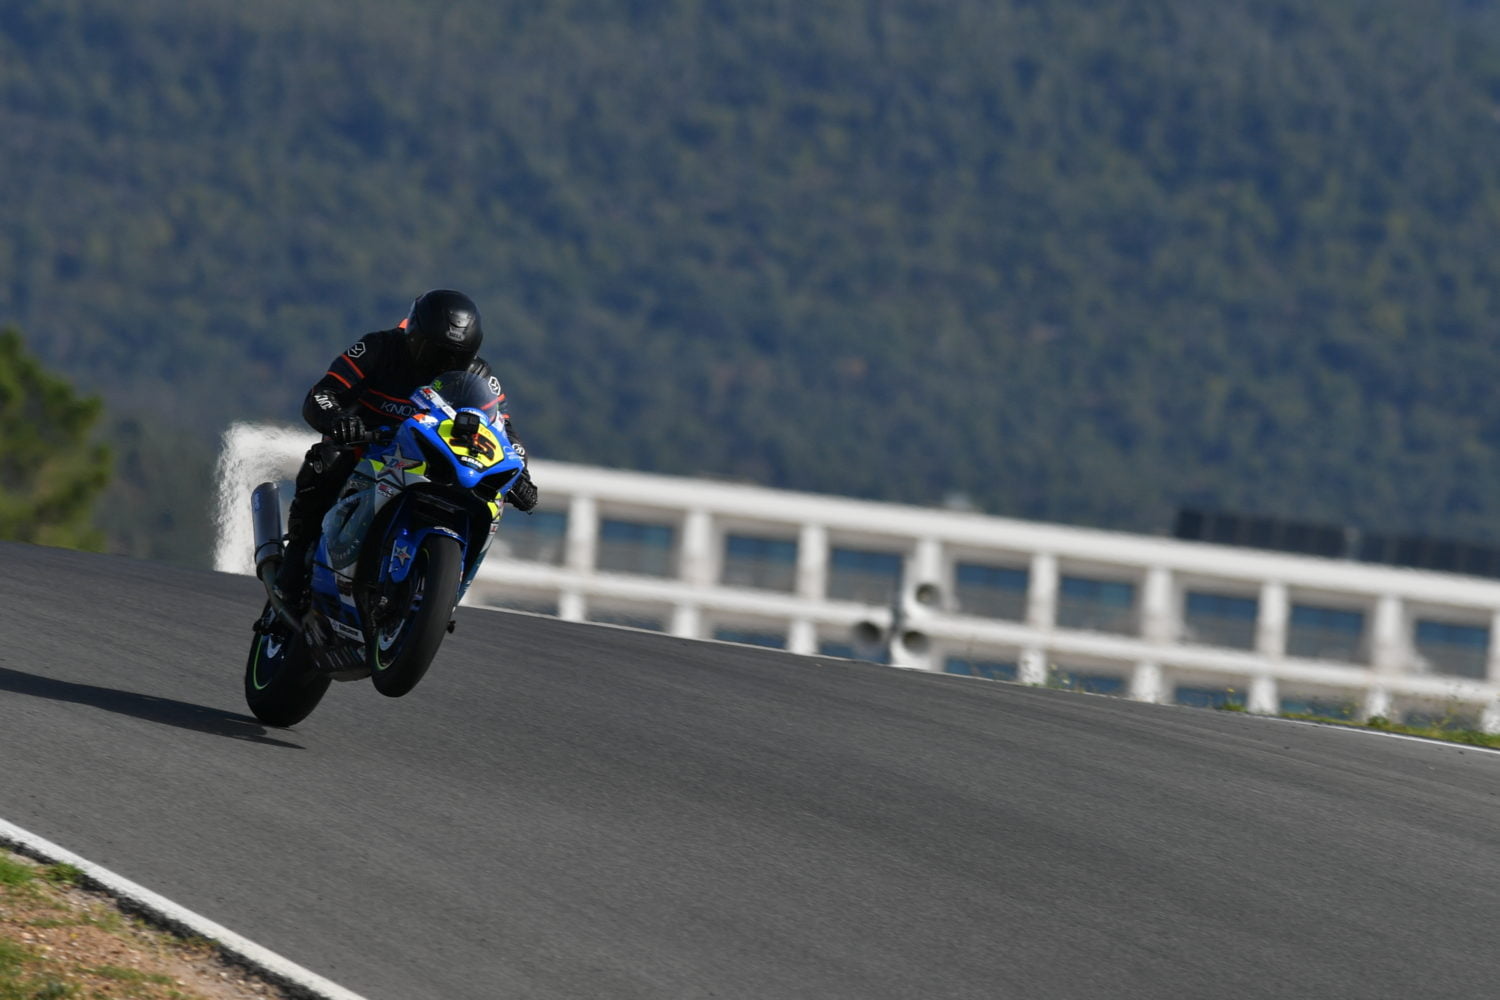 Knox GSXR1000r Superstock bike – First ride report from Portimao